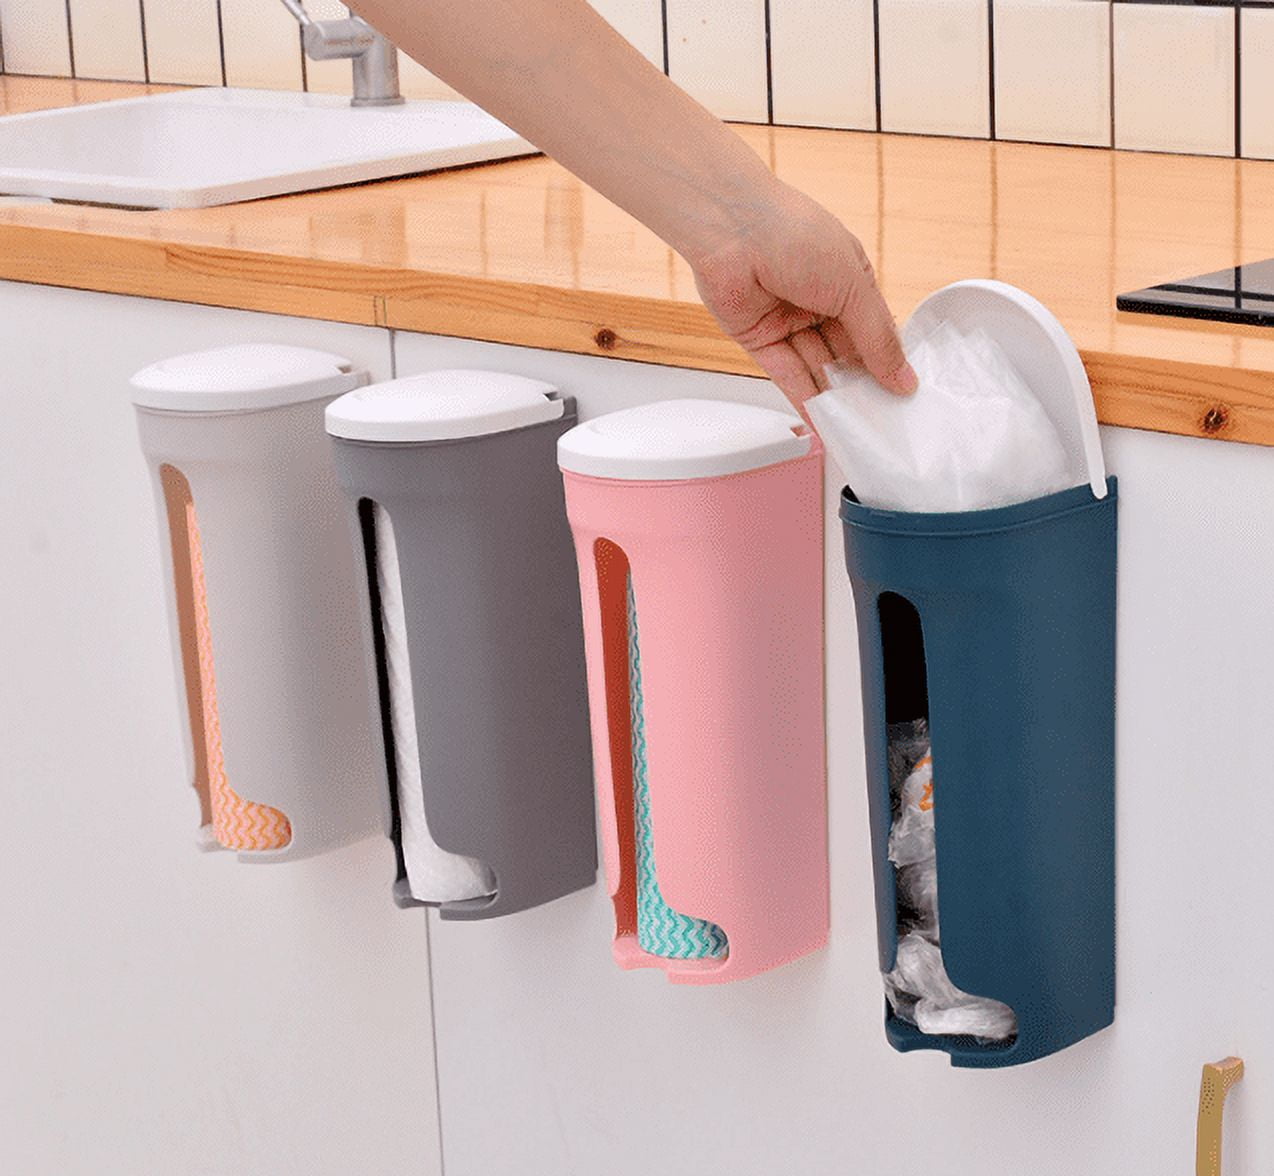 Trash Bag Holder for Plastic Bags - Garbage Bag Holder - Wall Mounted,  Under Counter or Top Counter